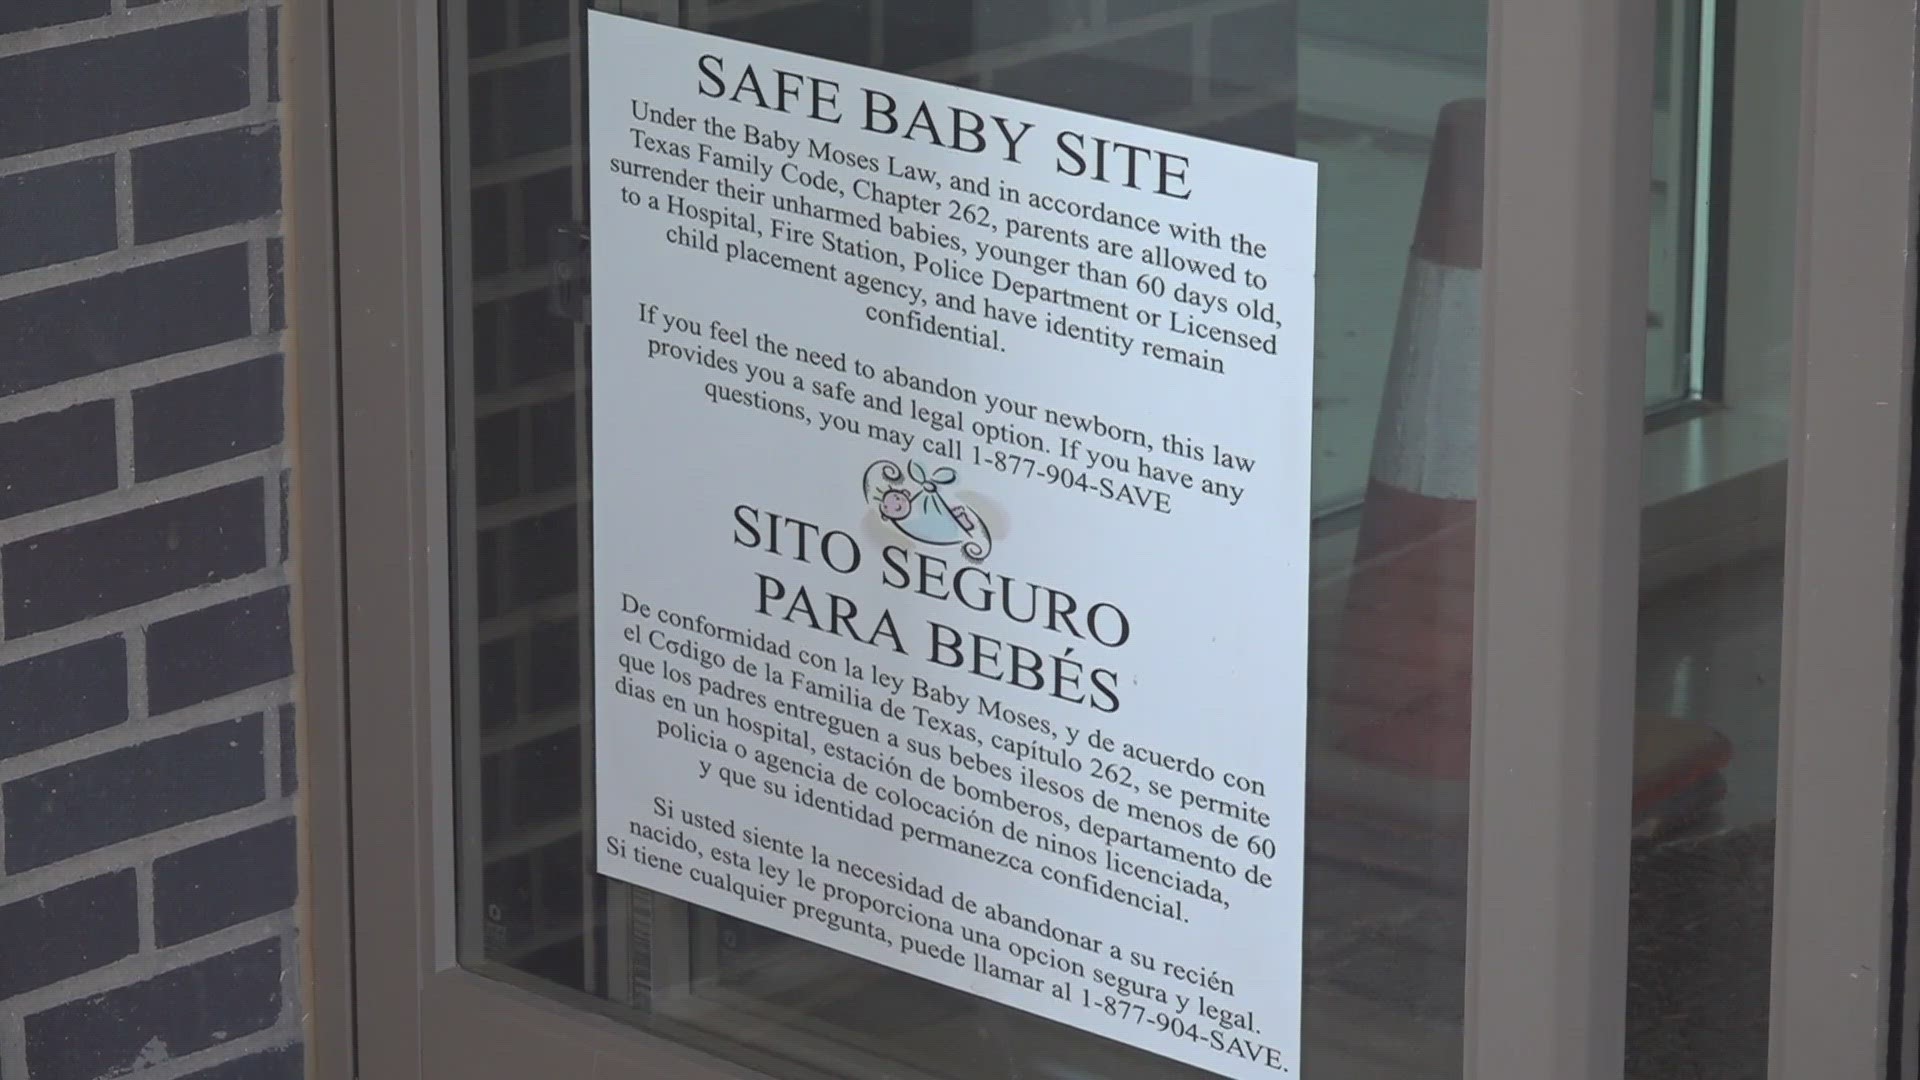 Hospitals are just one of several locations that welcome in surrendered newborn babies, if they are 60 days old or younger, thanks to the 'Safe Haven' program.